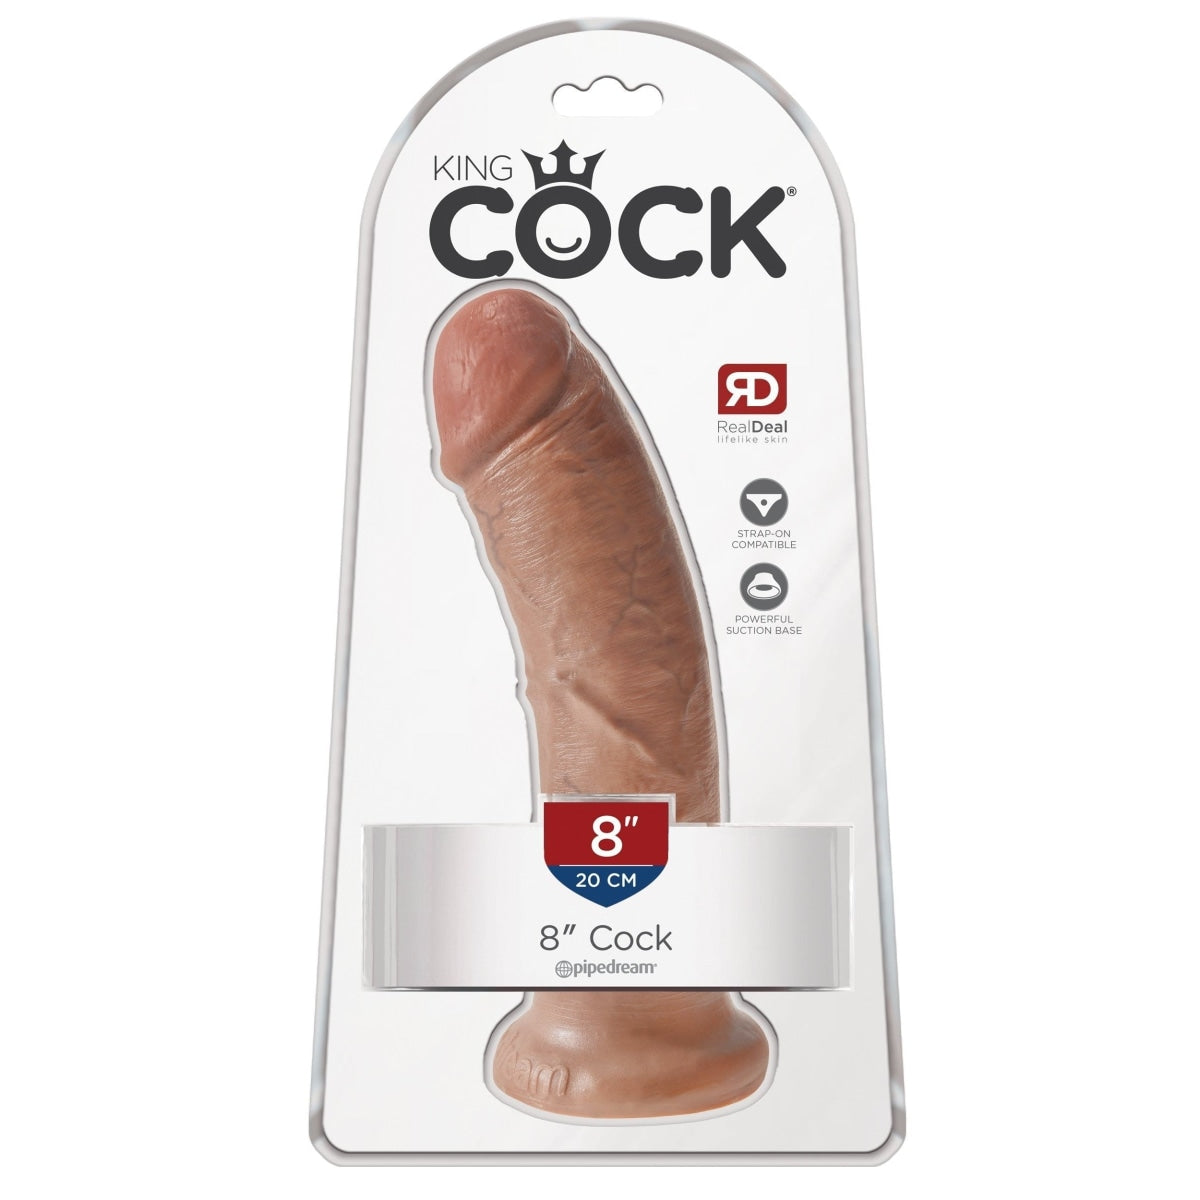 King Cock 8 In Cock Tan Intimates Adult Boutique